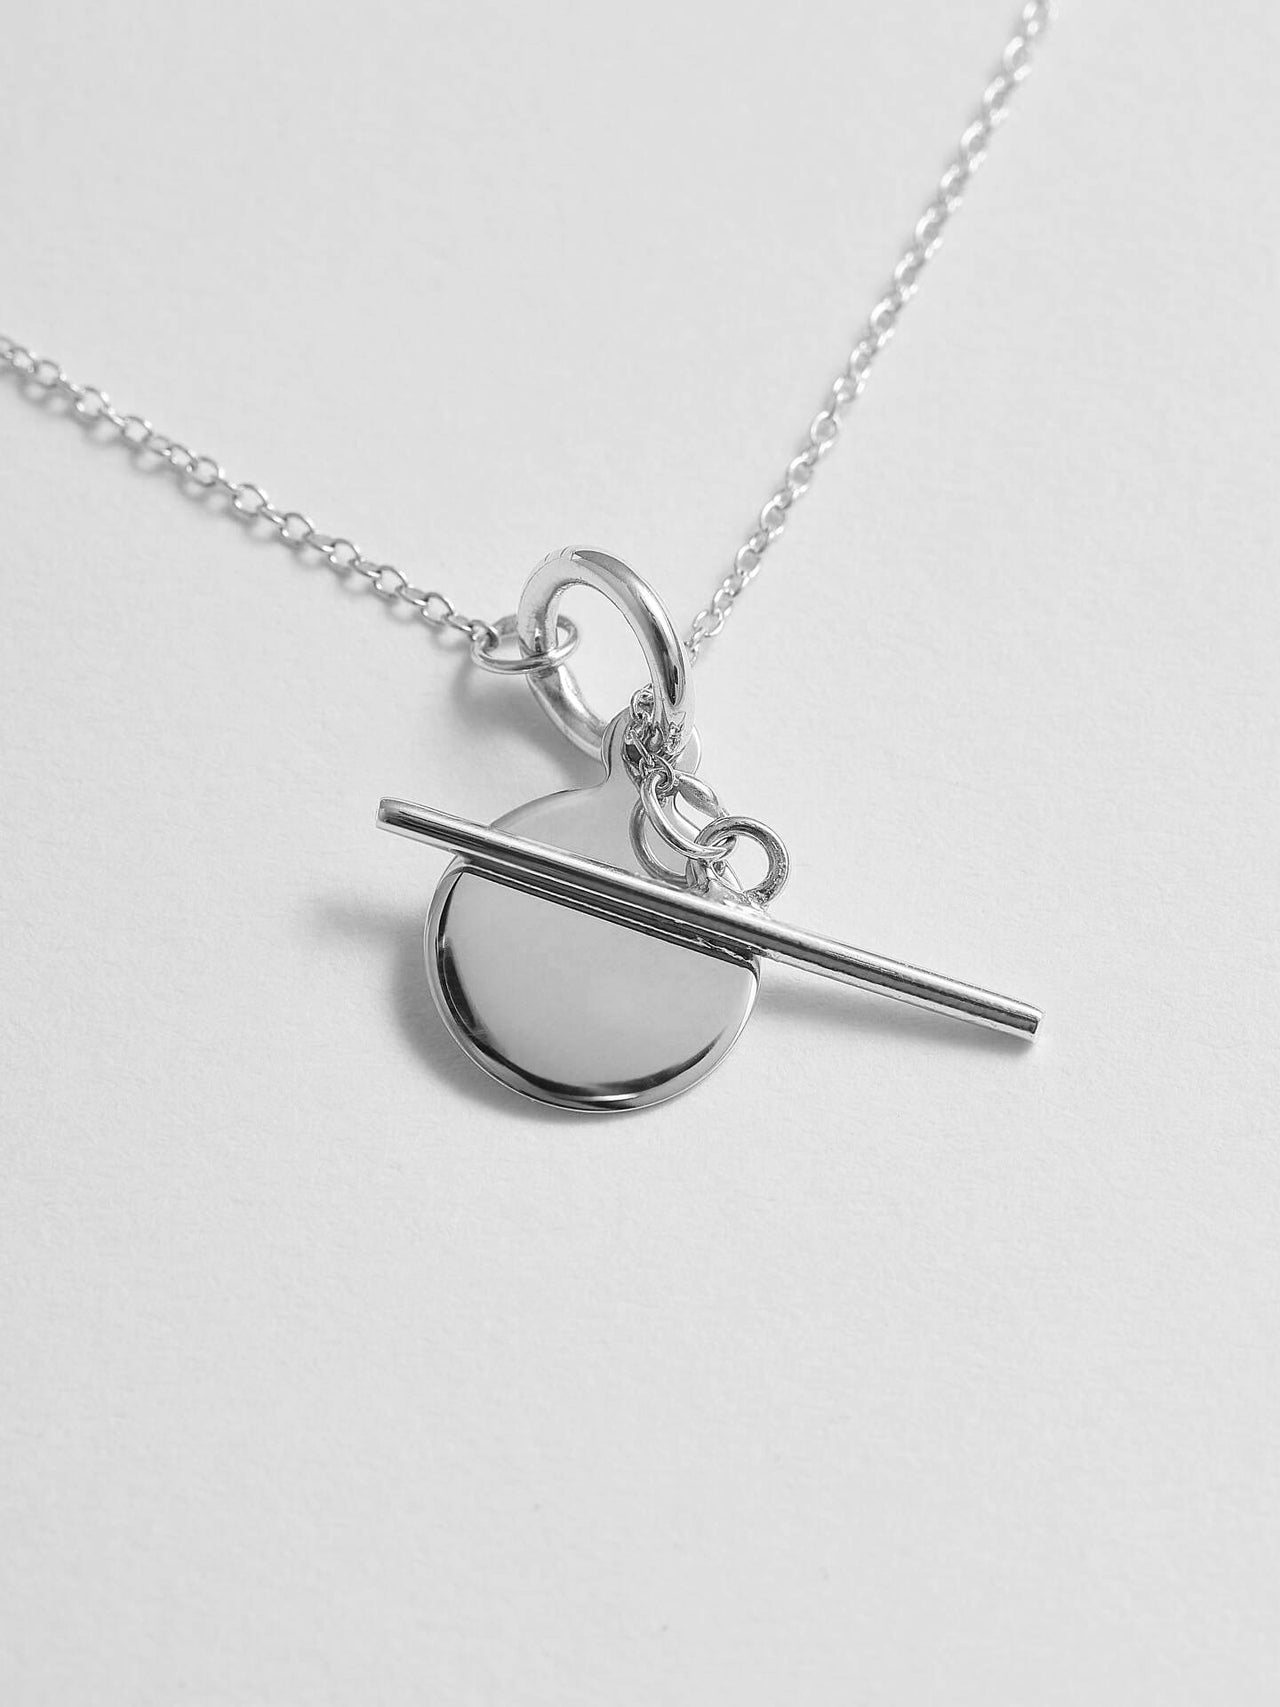 Close up shot of Sterling Silver Mini Disk and Toggle Necklace.